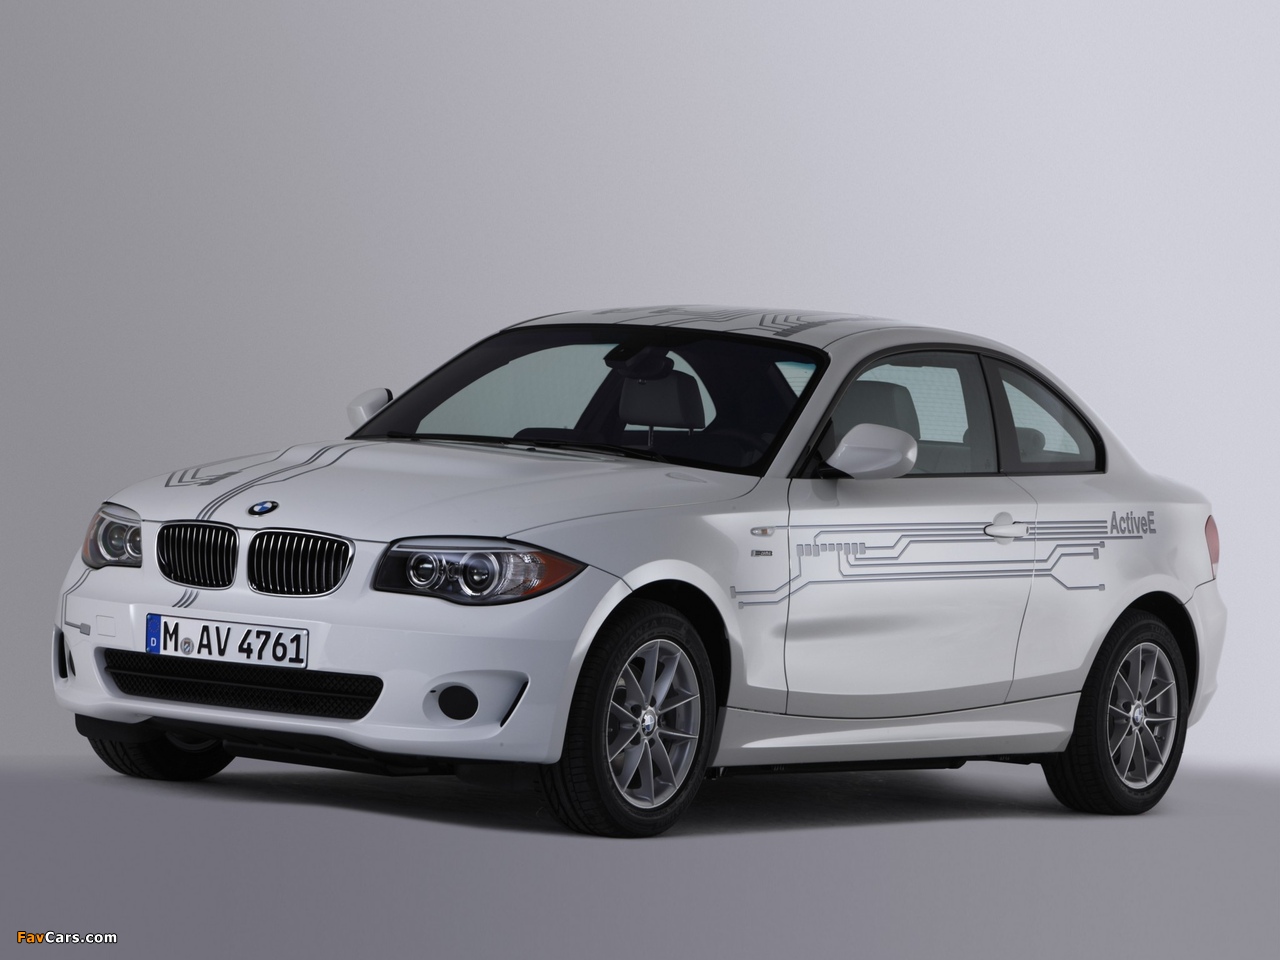 BMW 1 Series Coupe ActiveE Test Car (E82) 2011 pictures (1280 x 960)